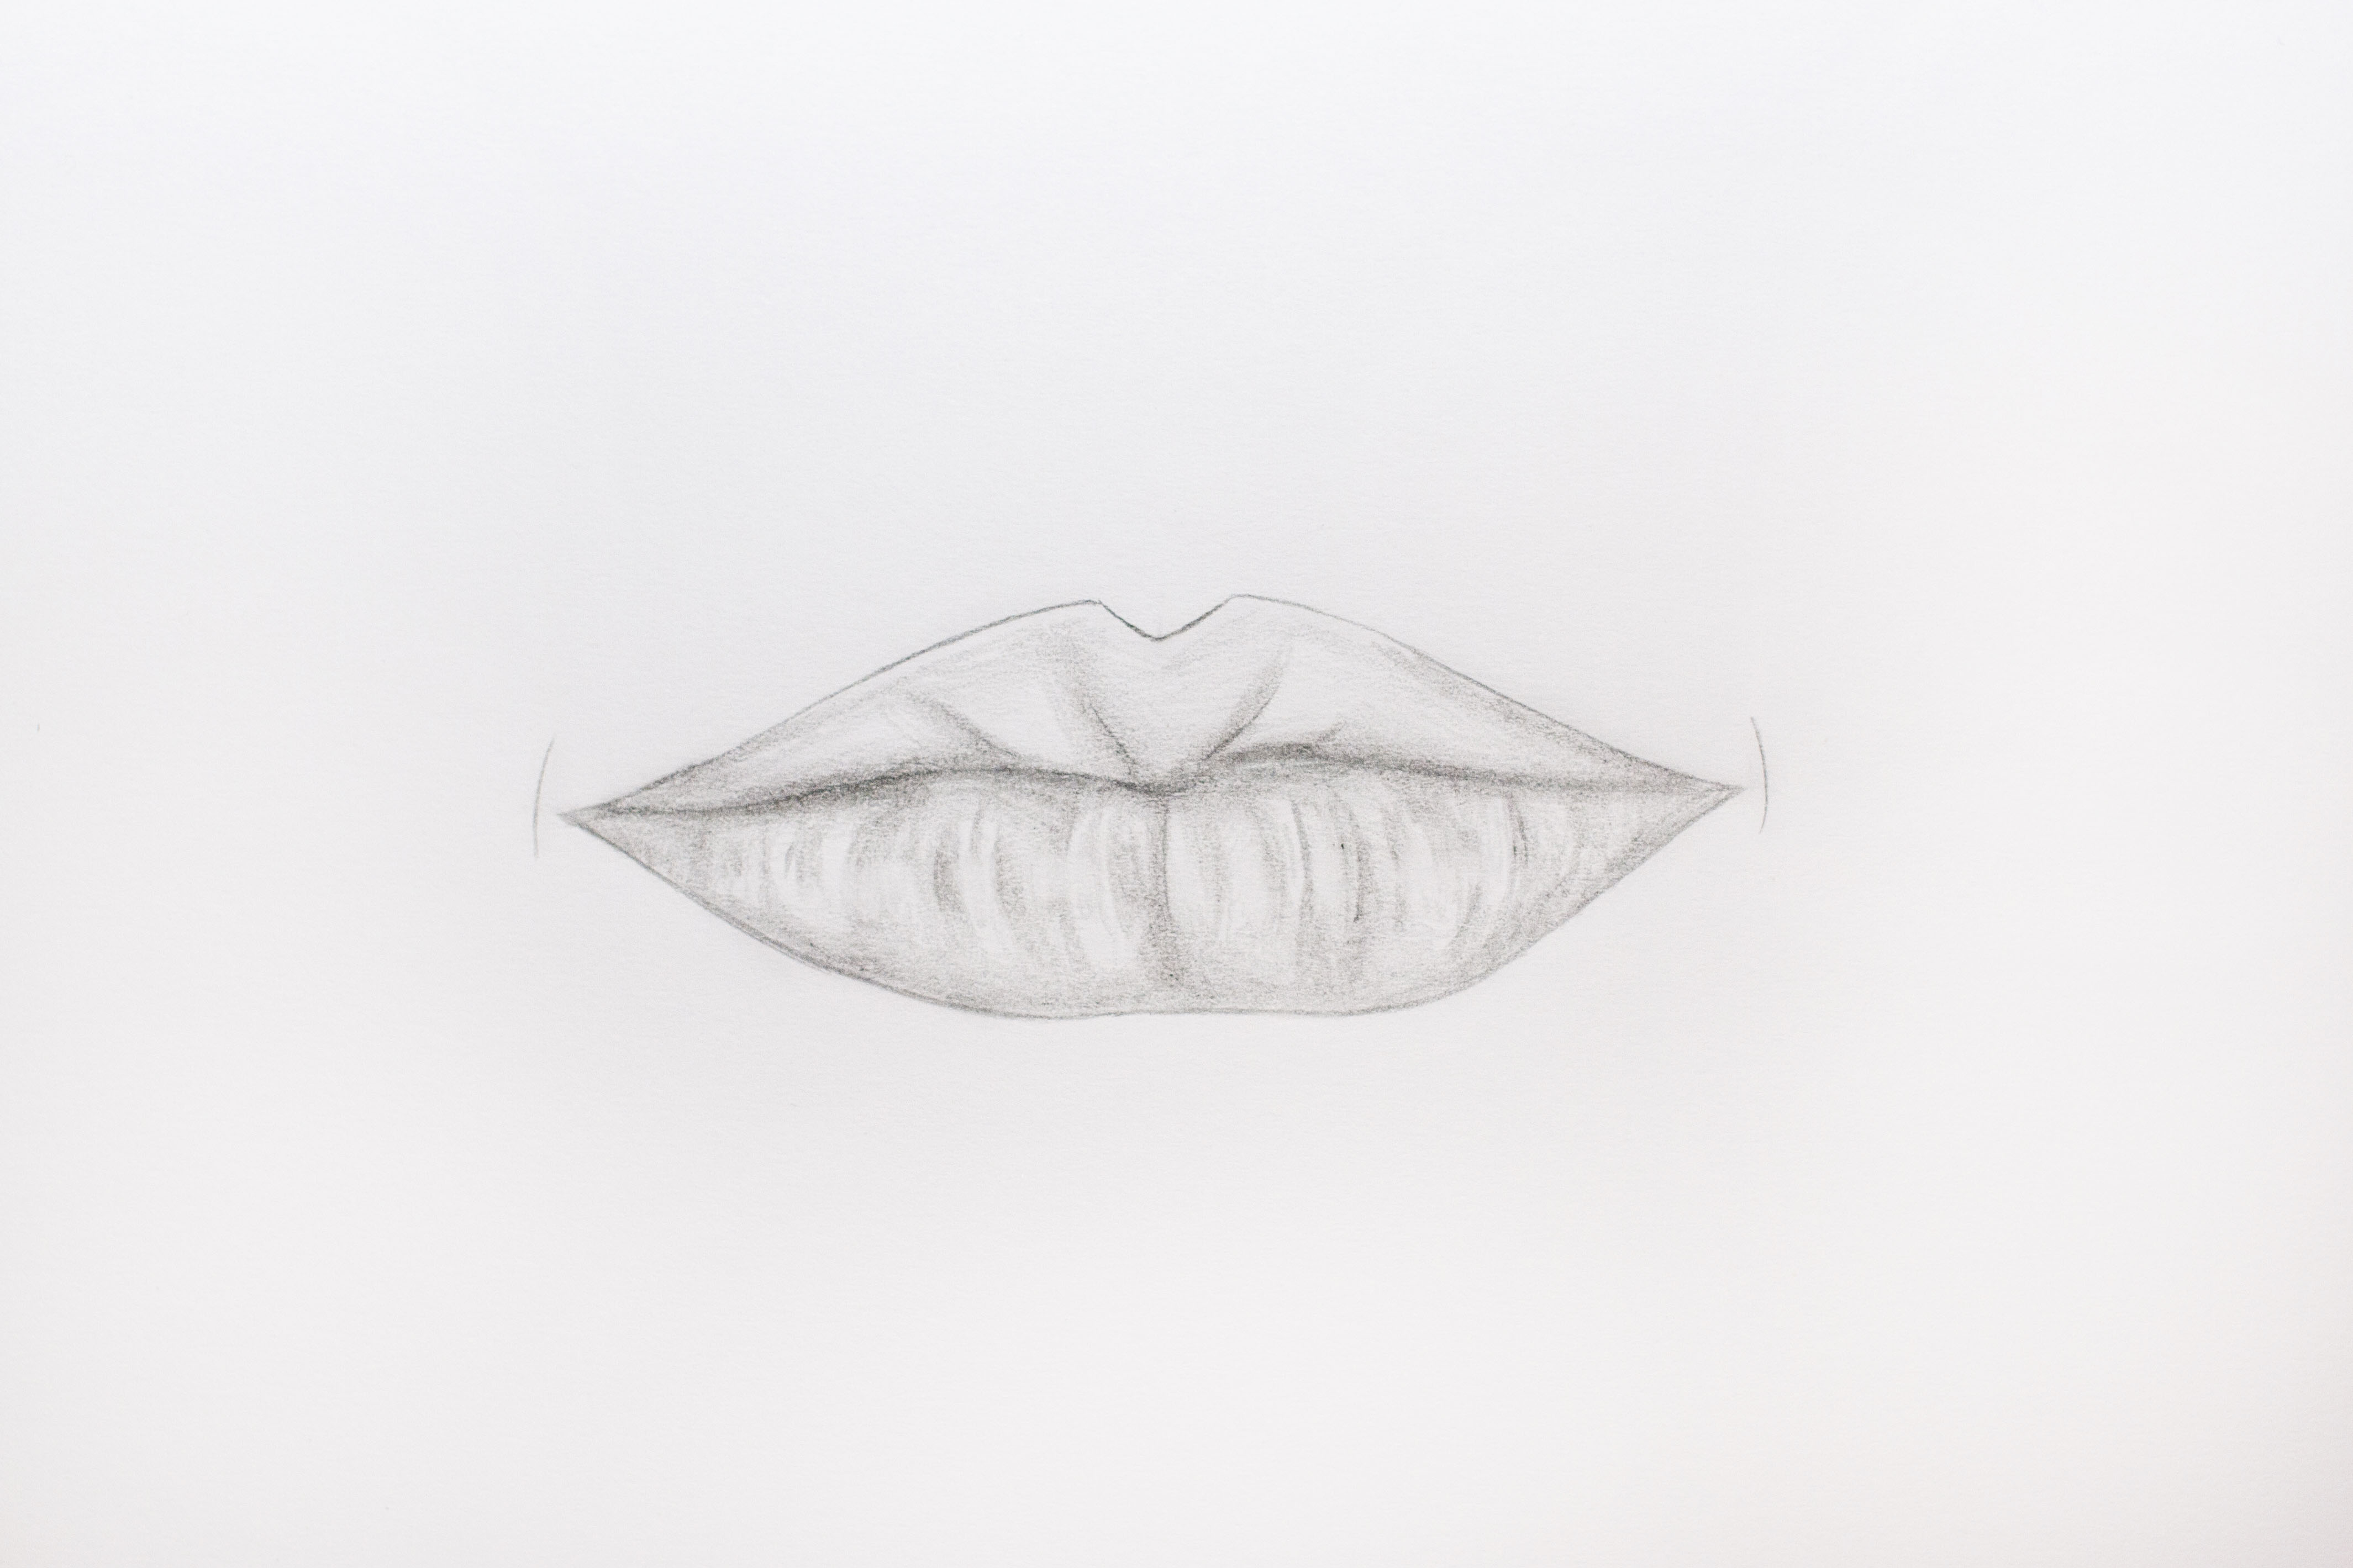 how to draw lips step 8 ec24fd0